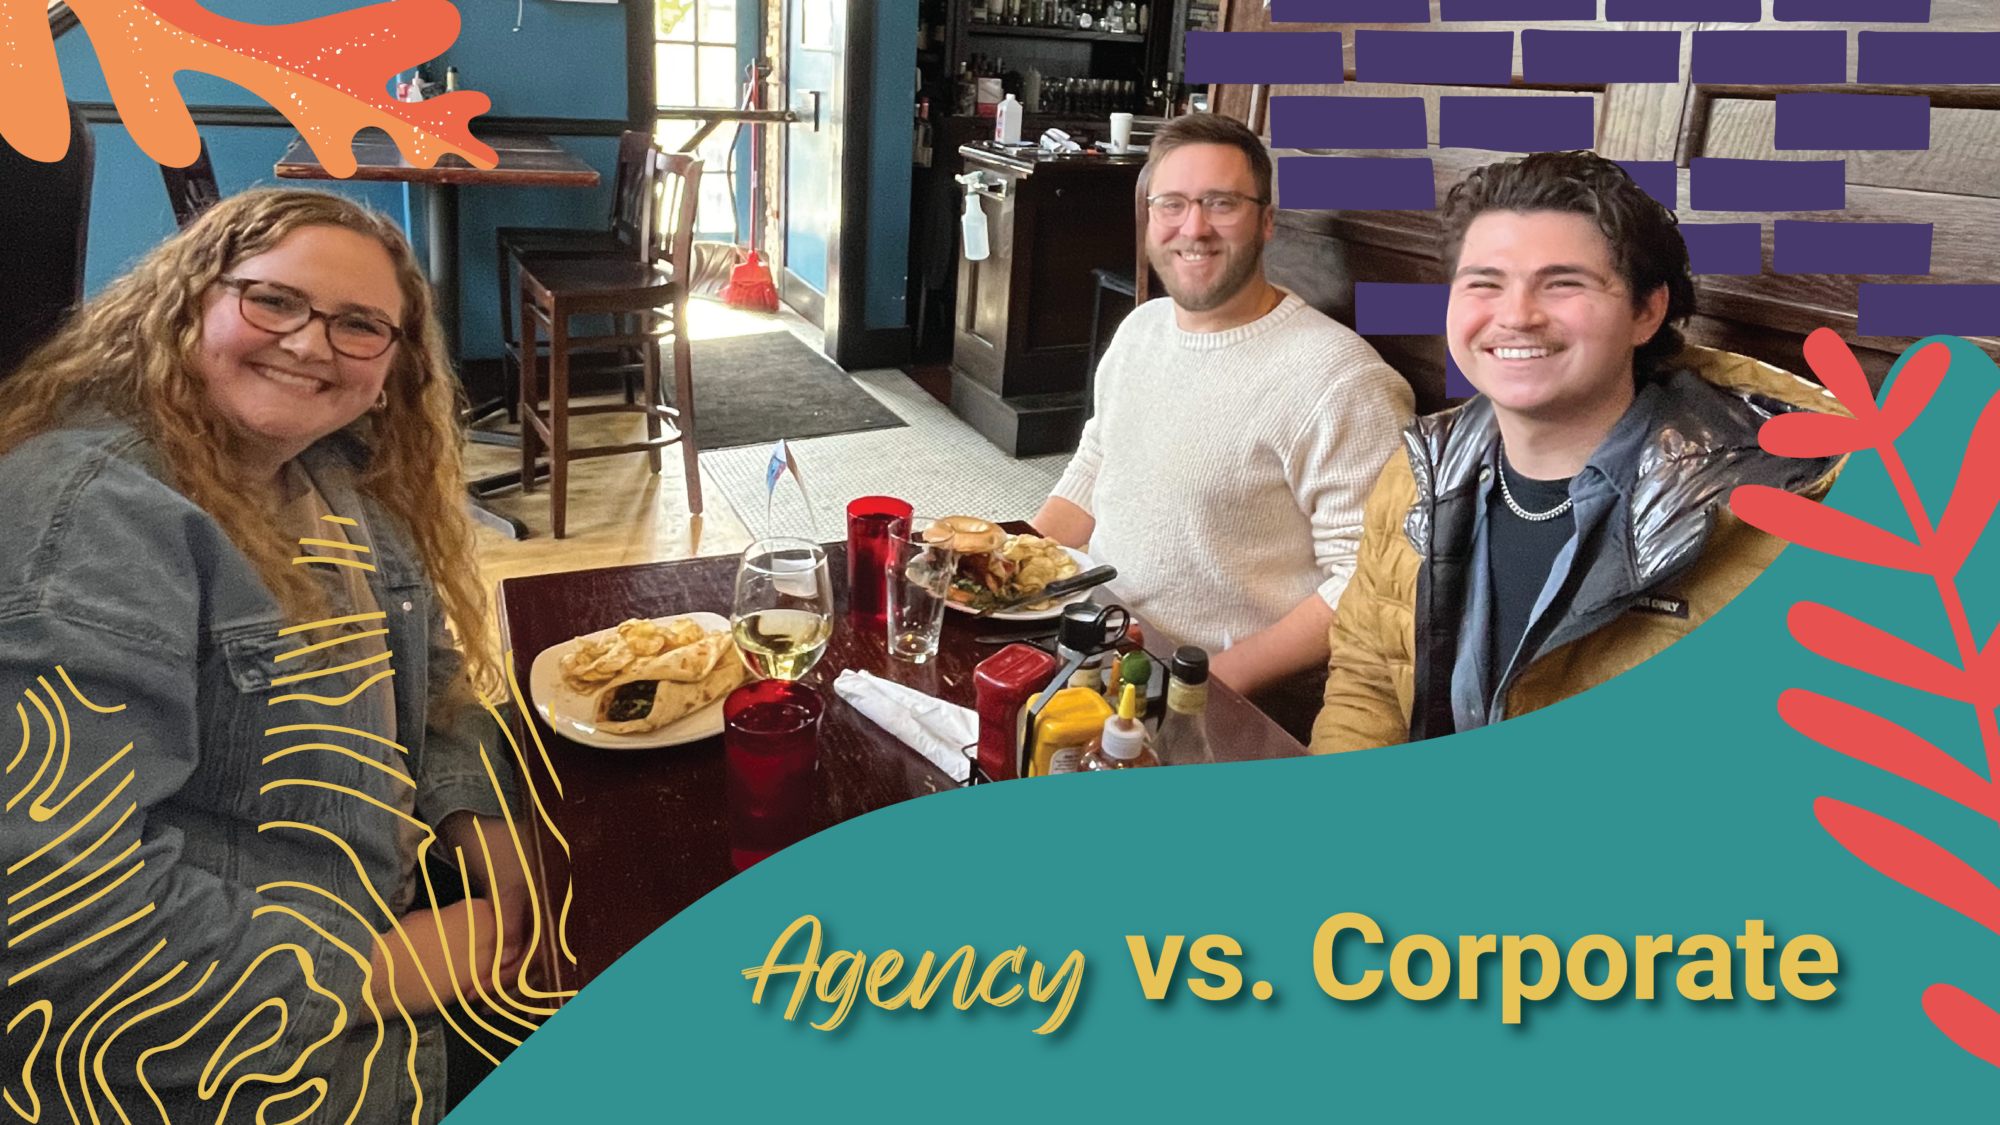 Emma, Derek and Chandler sit around some delicious food "Agency vs. Corporate"